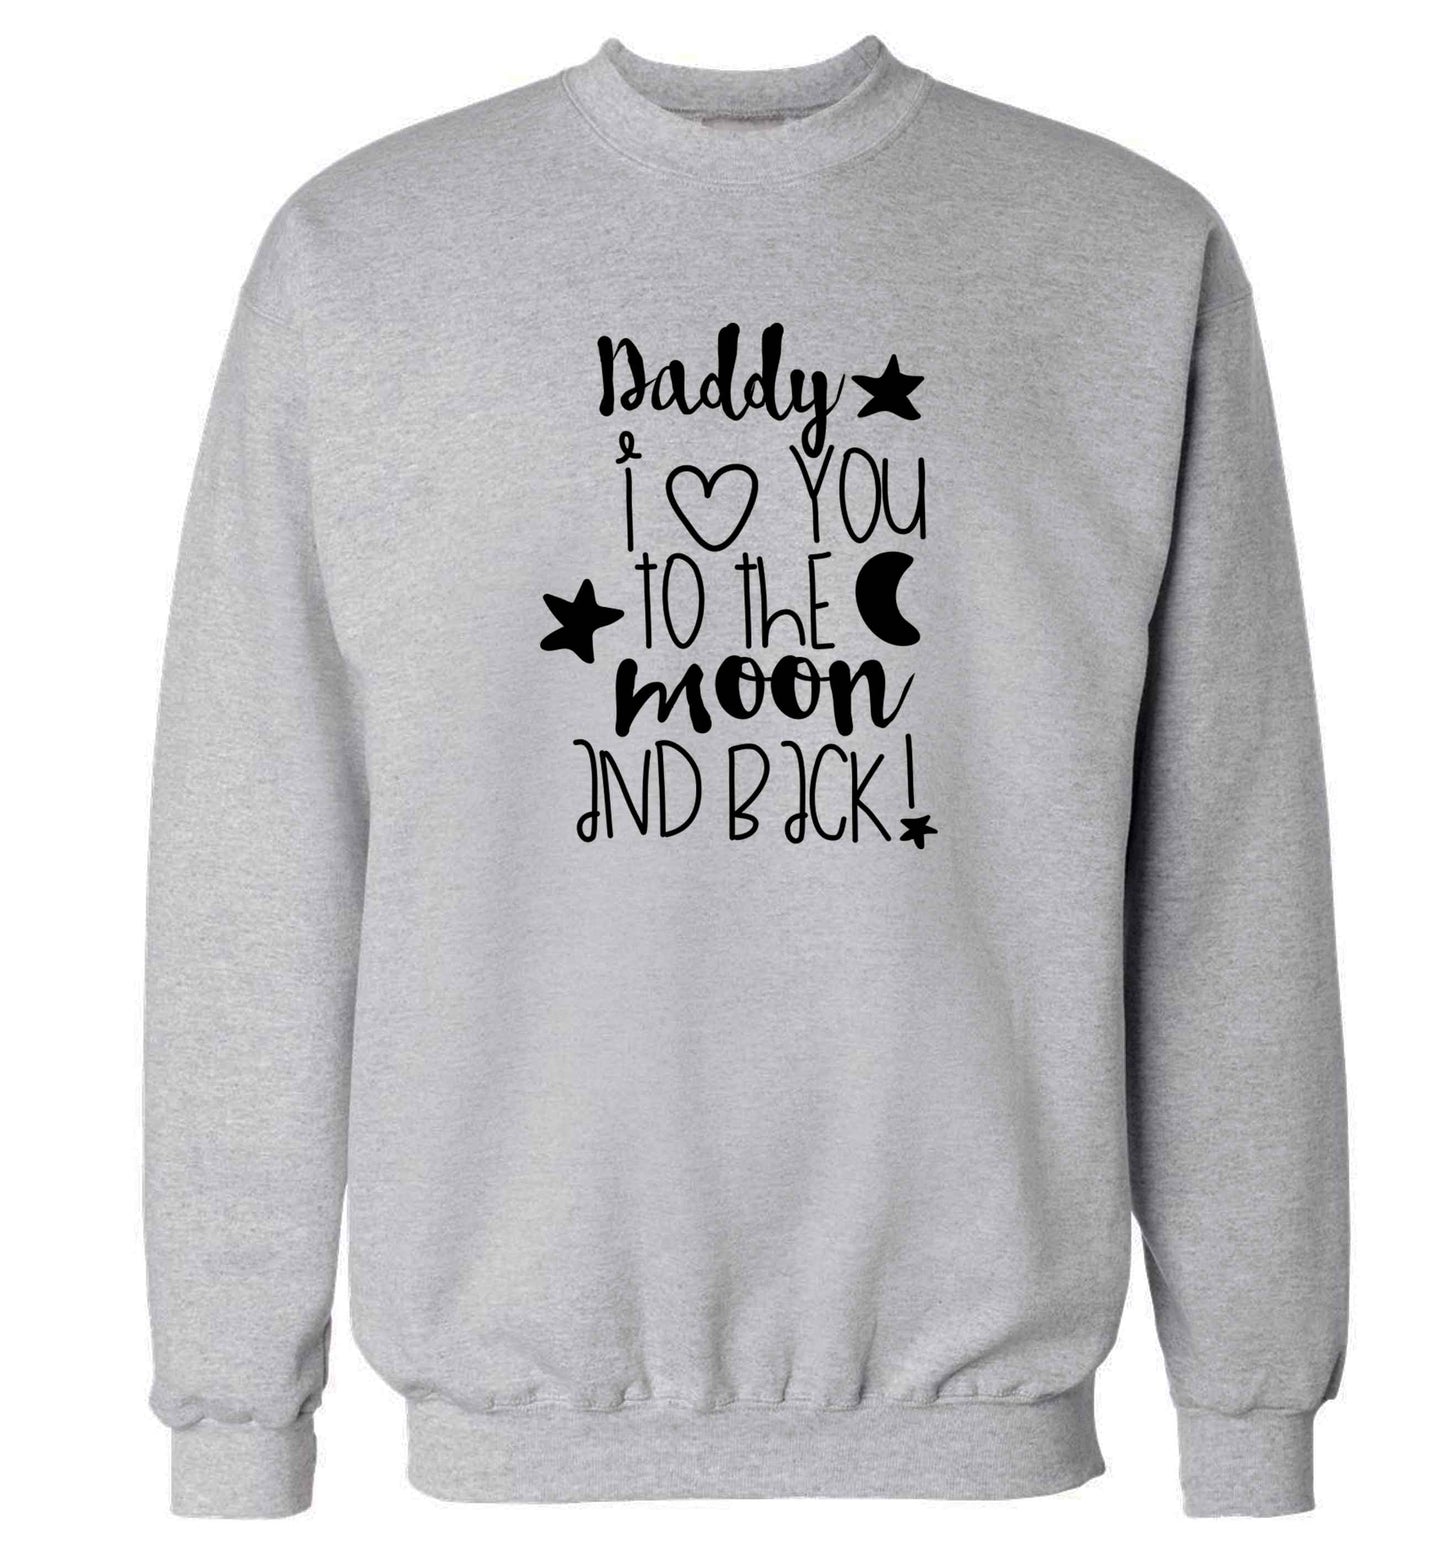 Daddy I love you to the moon and back adult's unisex grey sweater 2XL